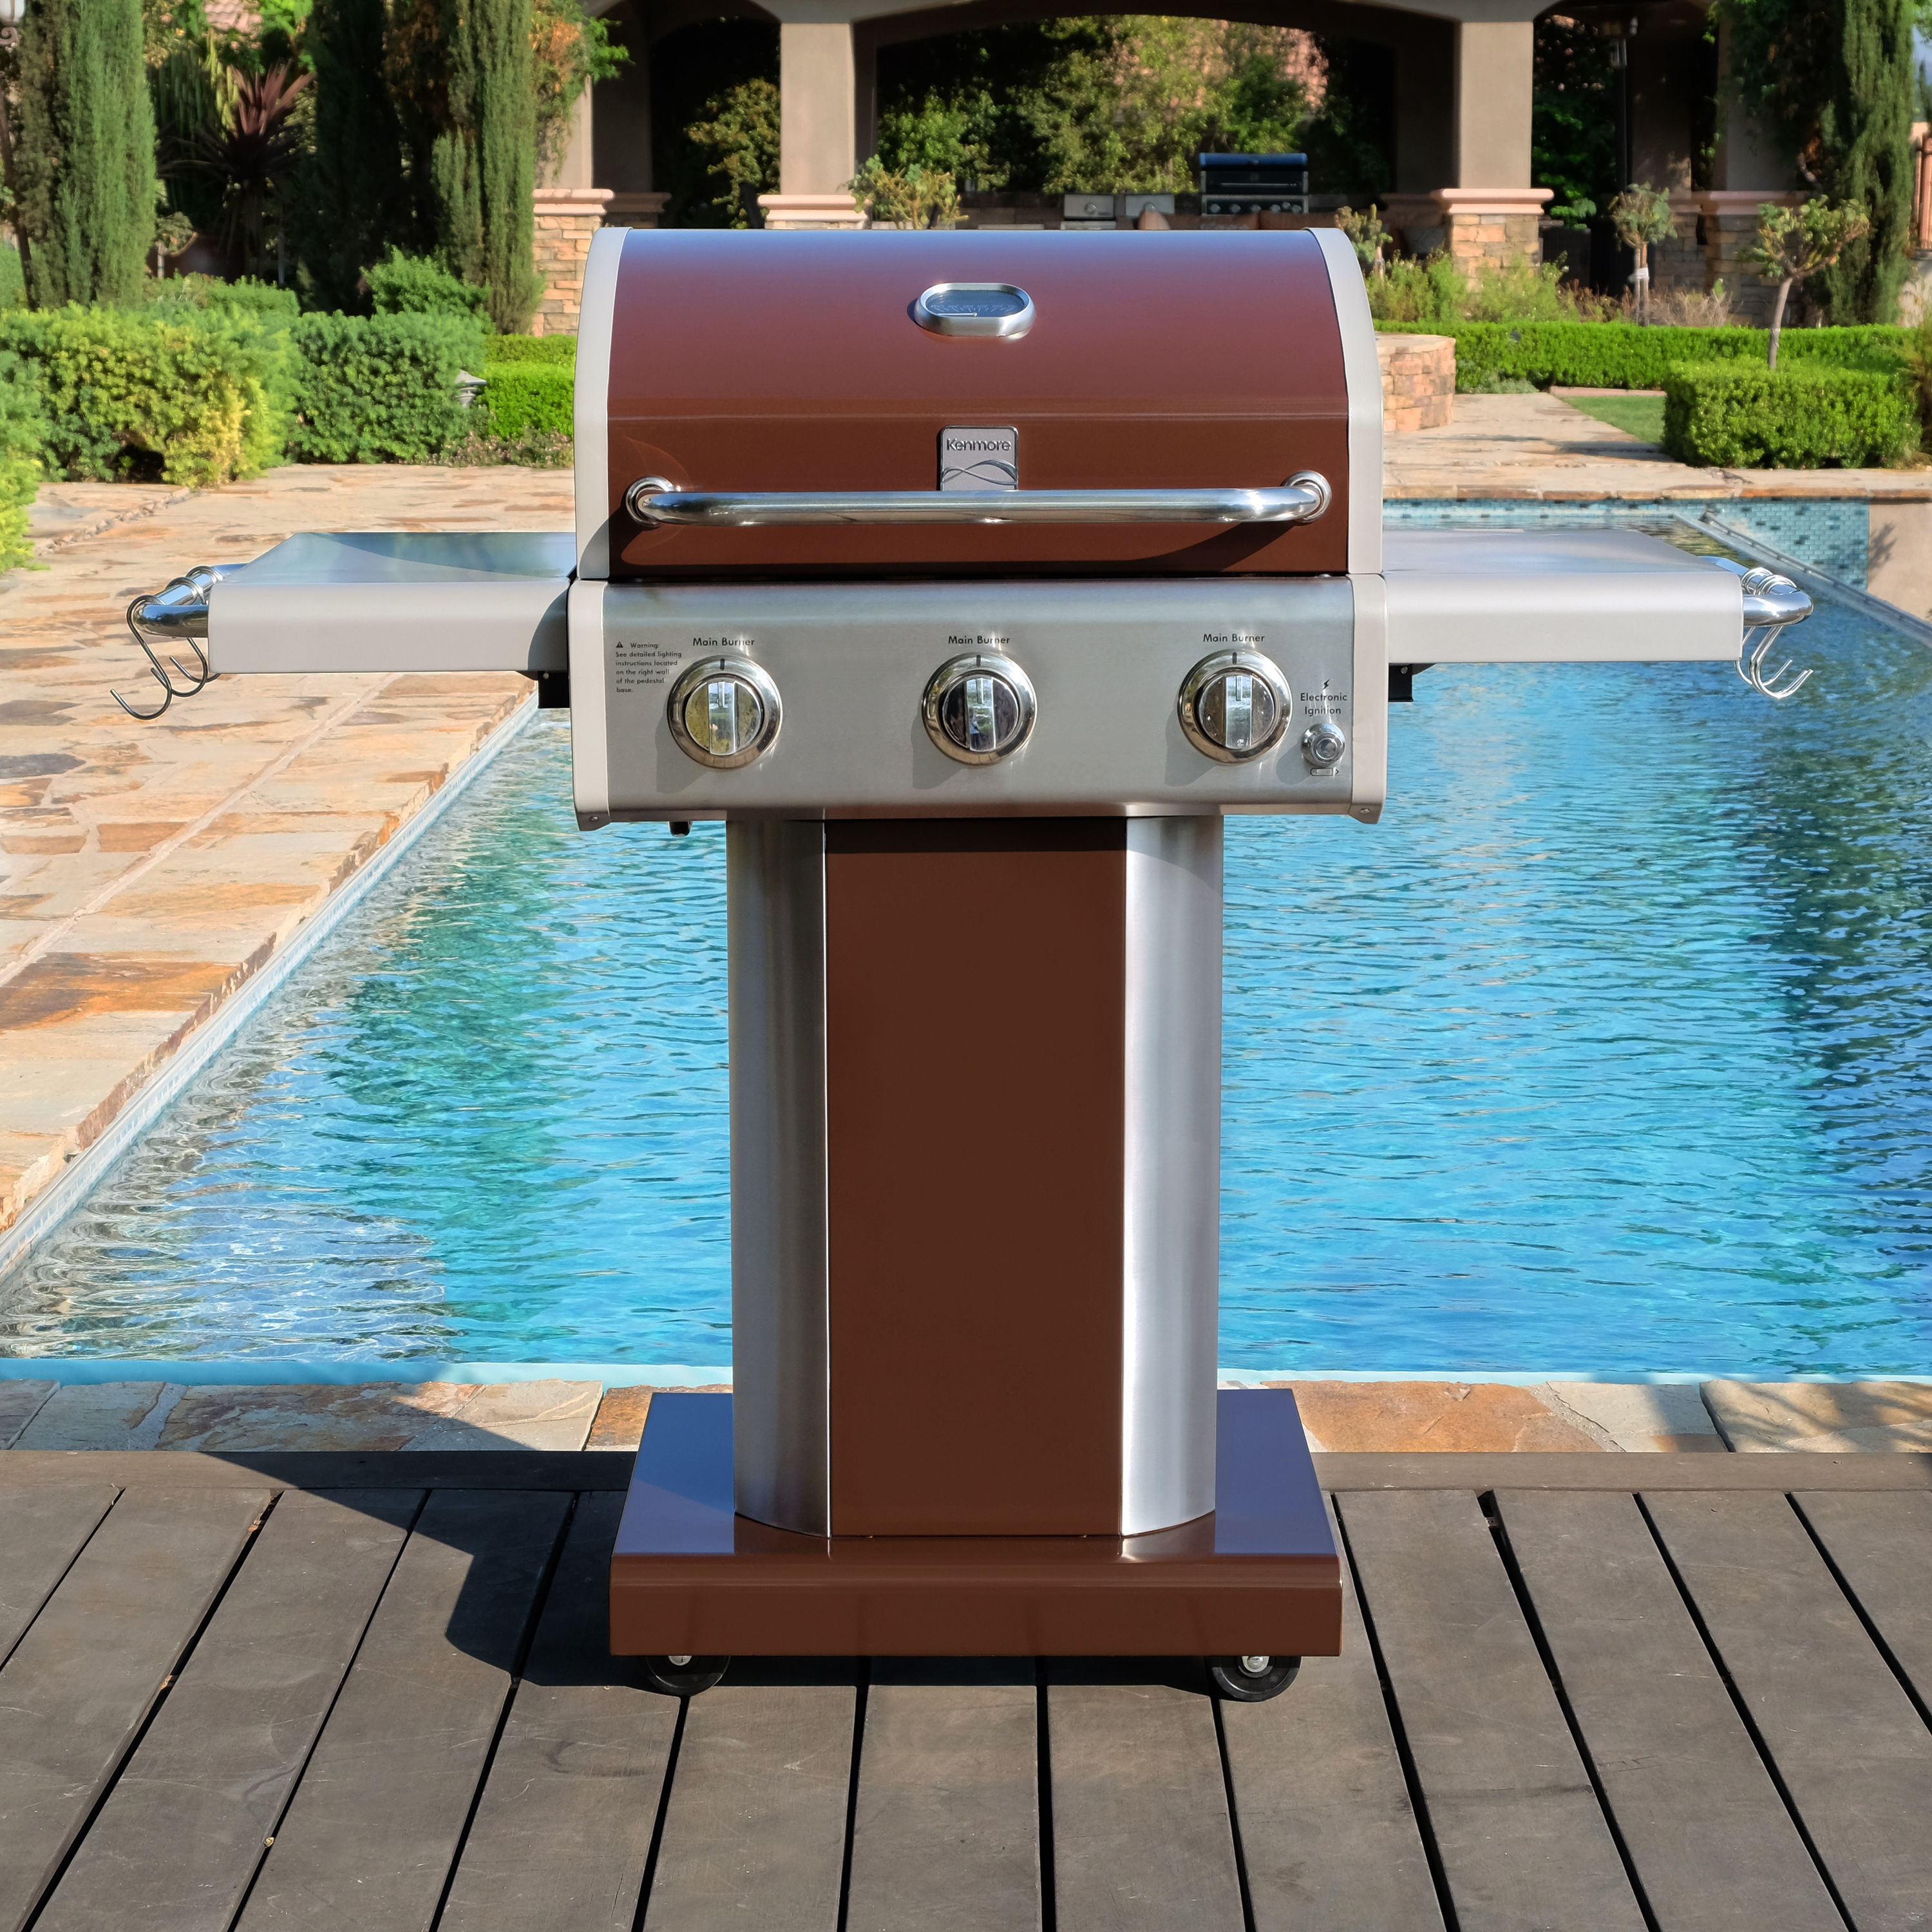 Kenmore PG-4030400LD-TL-AM 3 Burner Outdoor Patio Gas BBQ Propane Grill Teal 